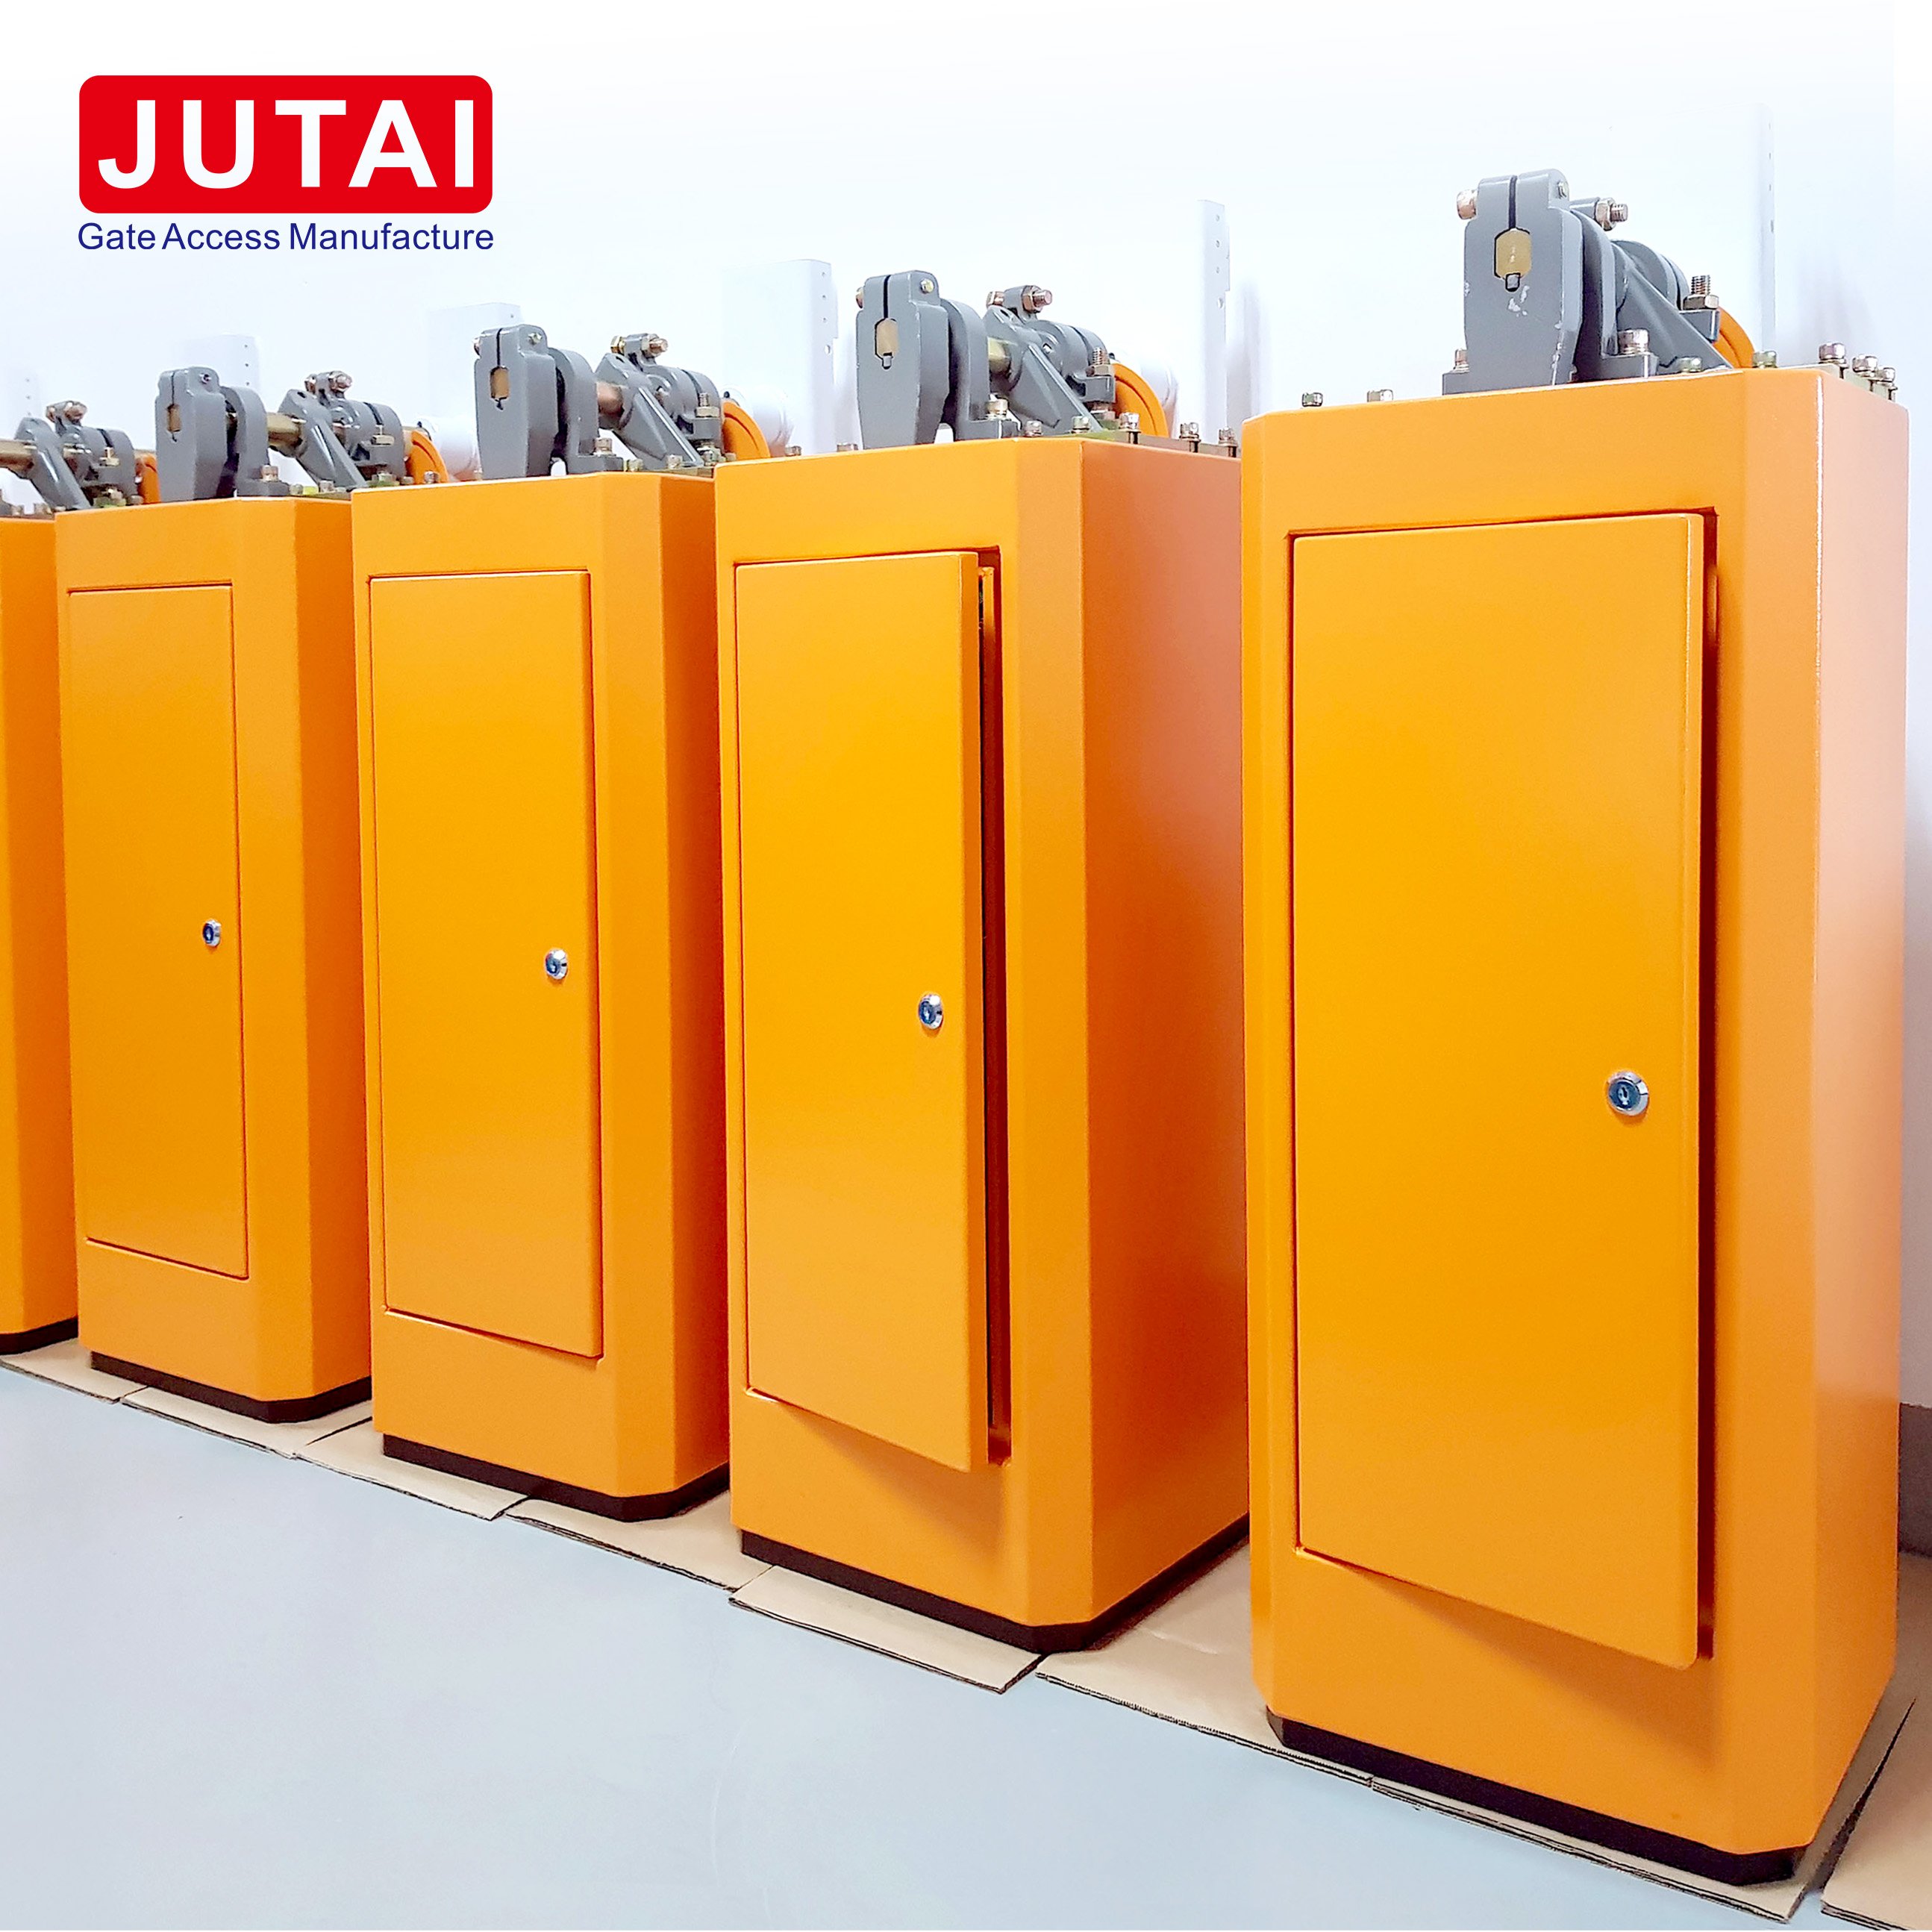 JUTAI Automatic Barrier Gate Operator Working With JUTAI Three Push Buttons to  Open/Stop/ Close